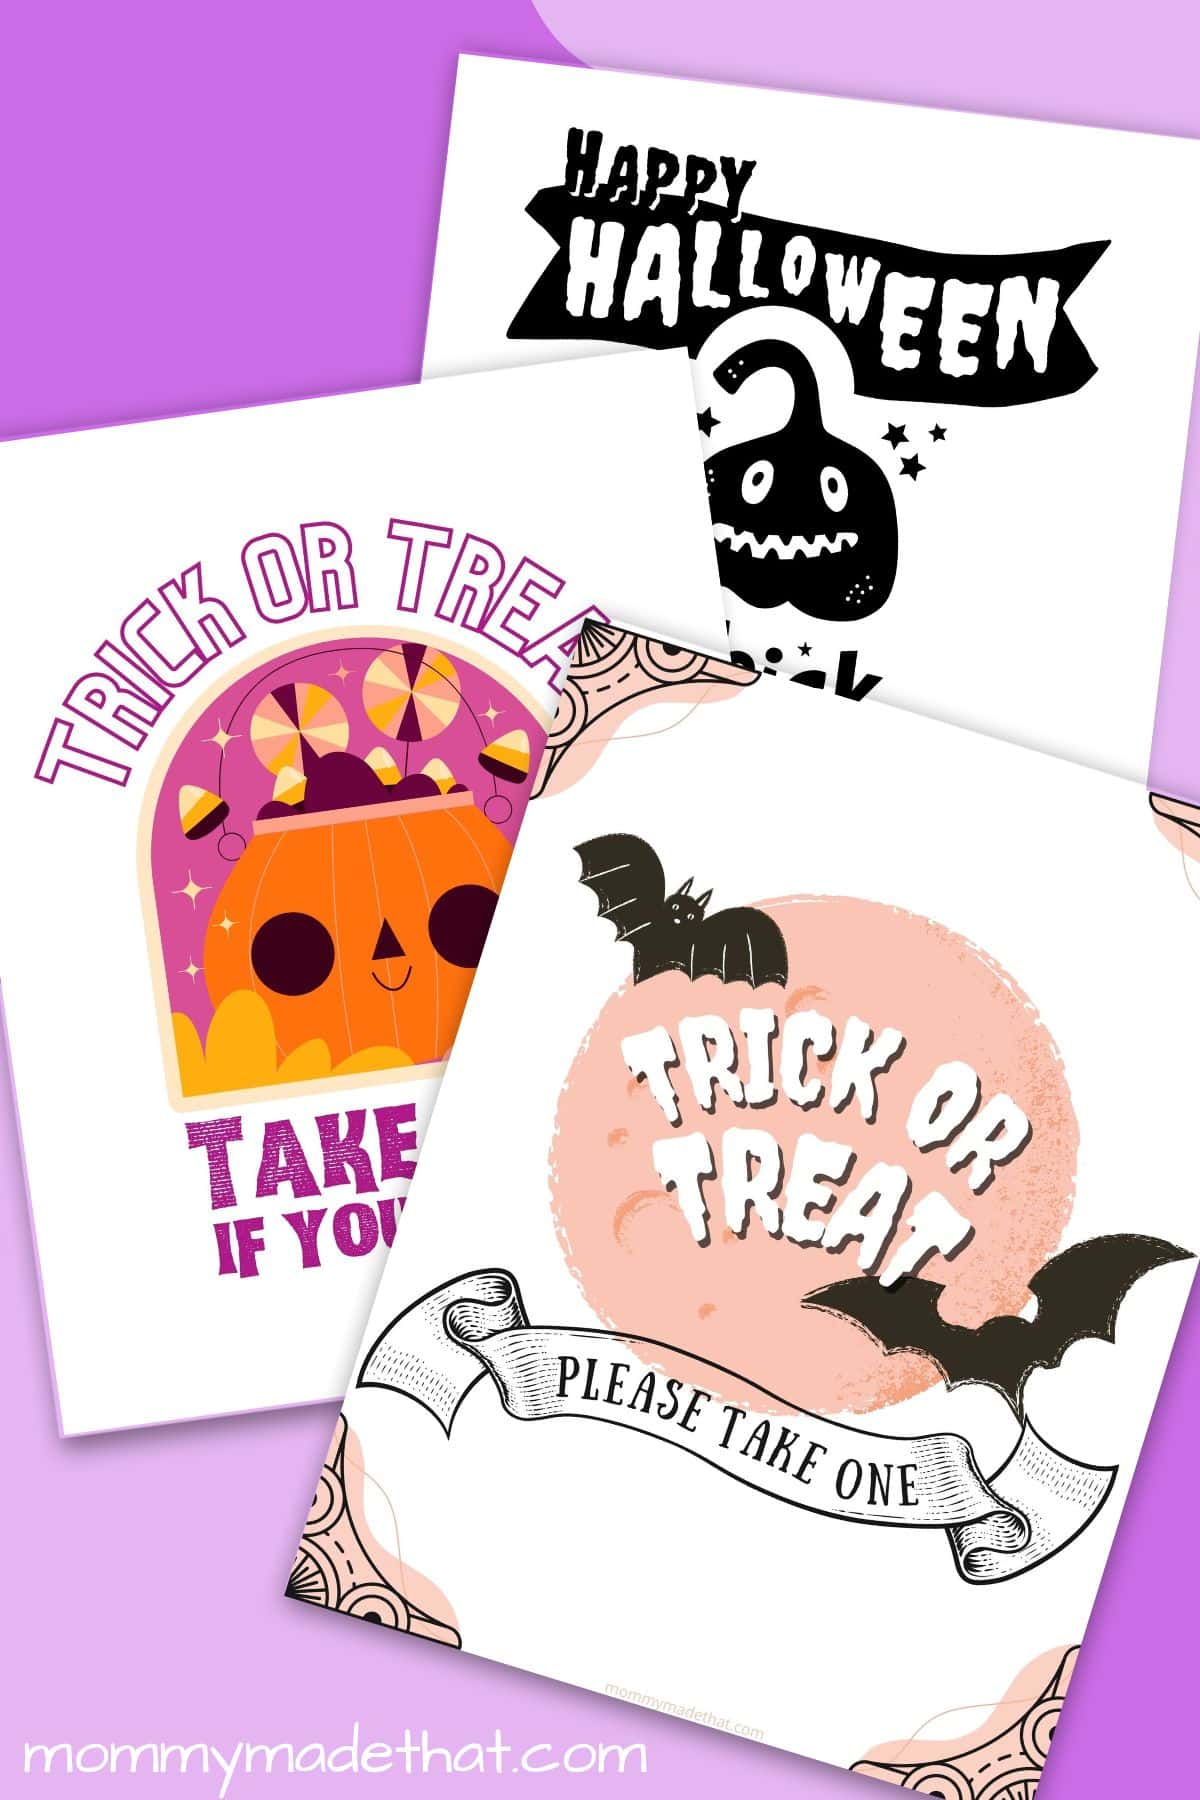 Please Take One Halloween Sign (The Best Free Printables)